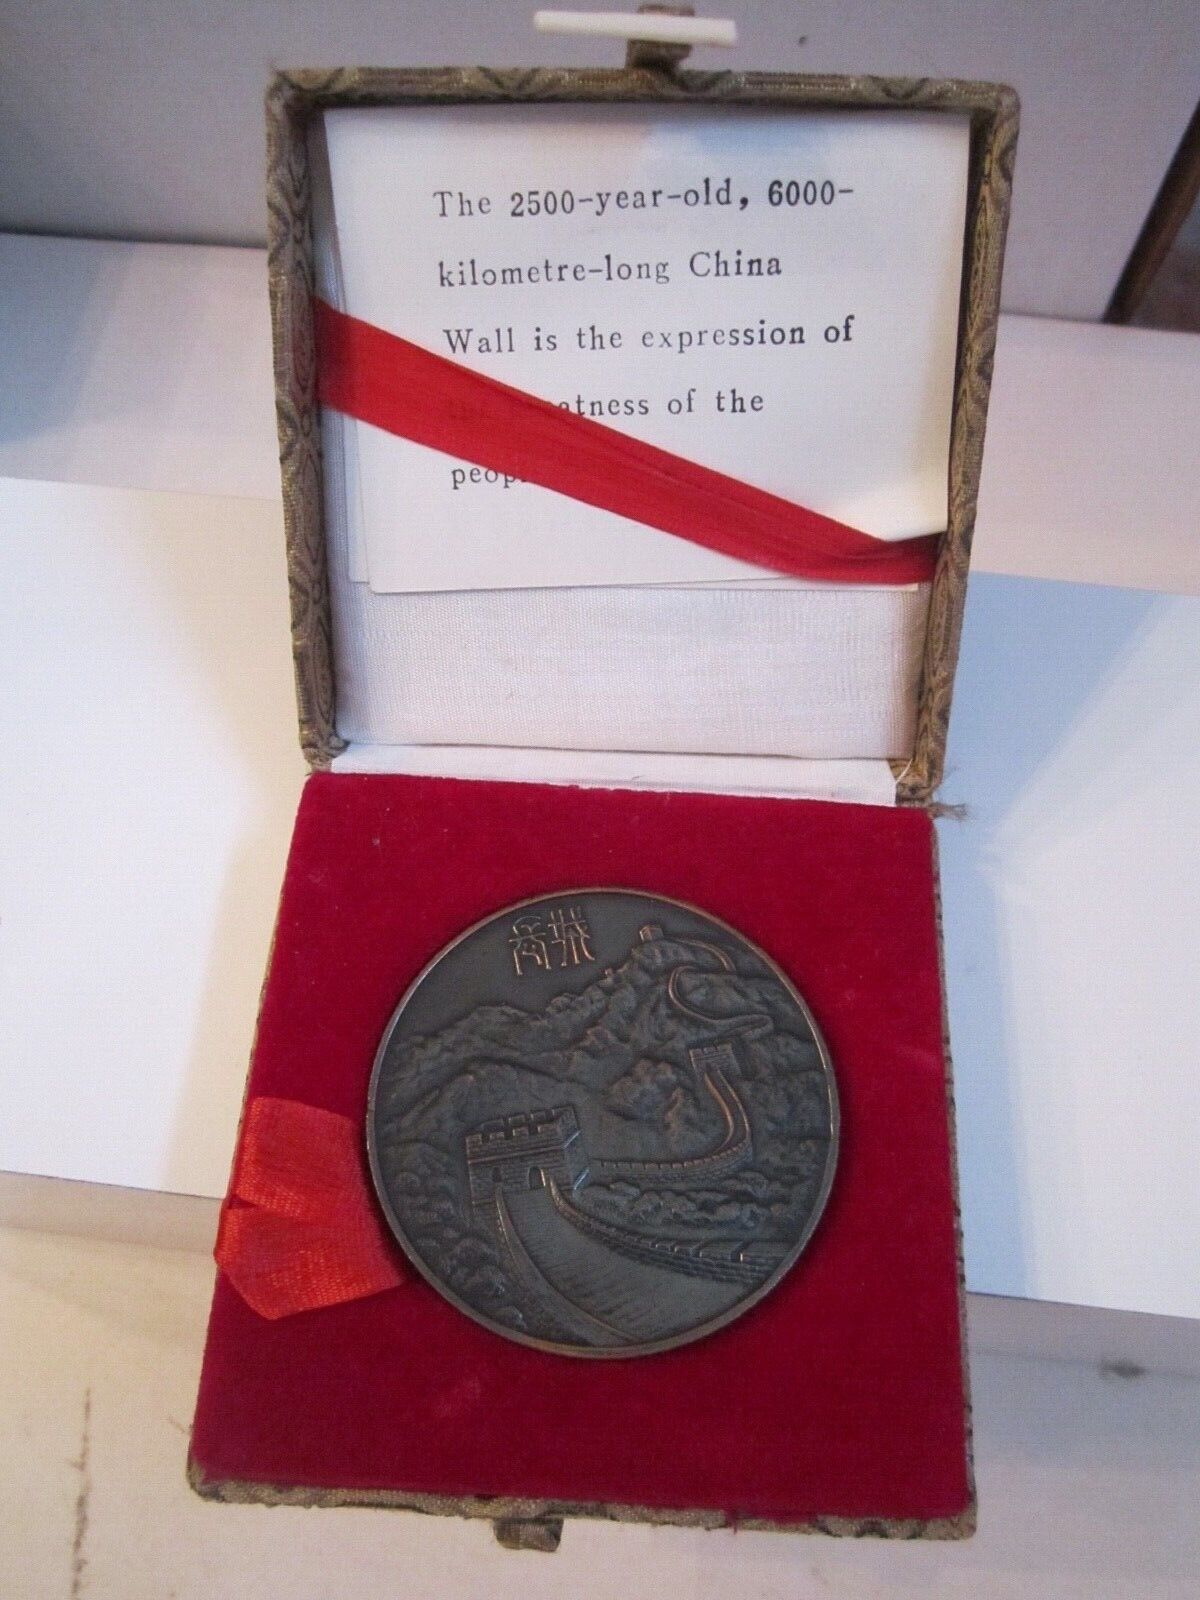 I HAVE CLIMBED THE GREAT WALL OF CHINA BRONZE MEDALLION COIN IN THE CASE